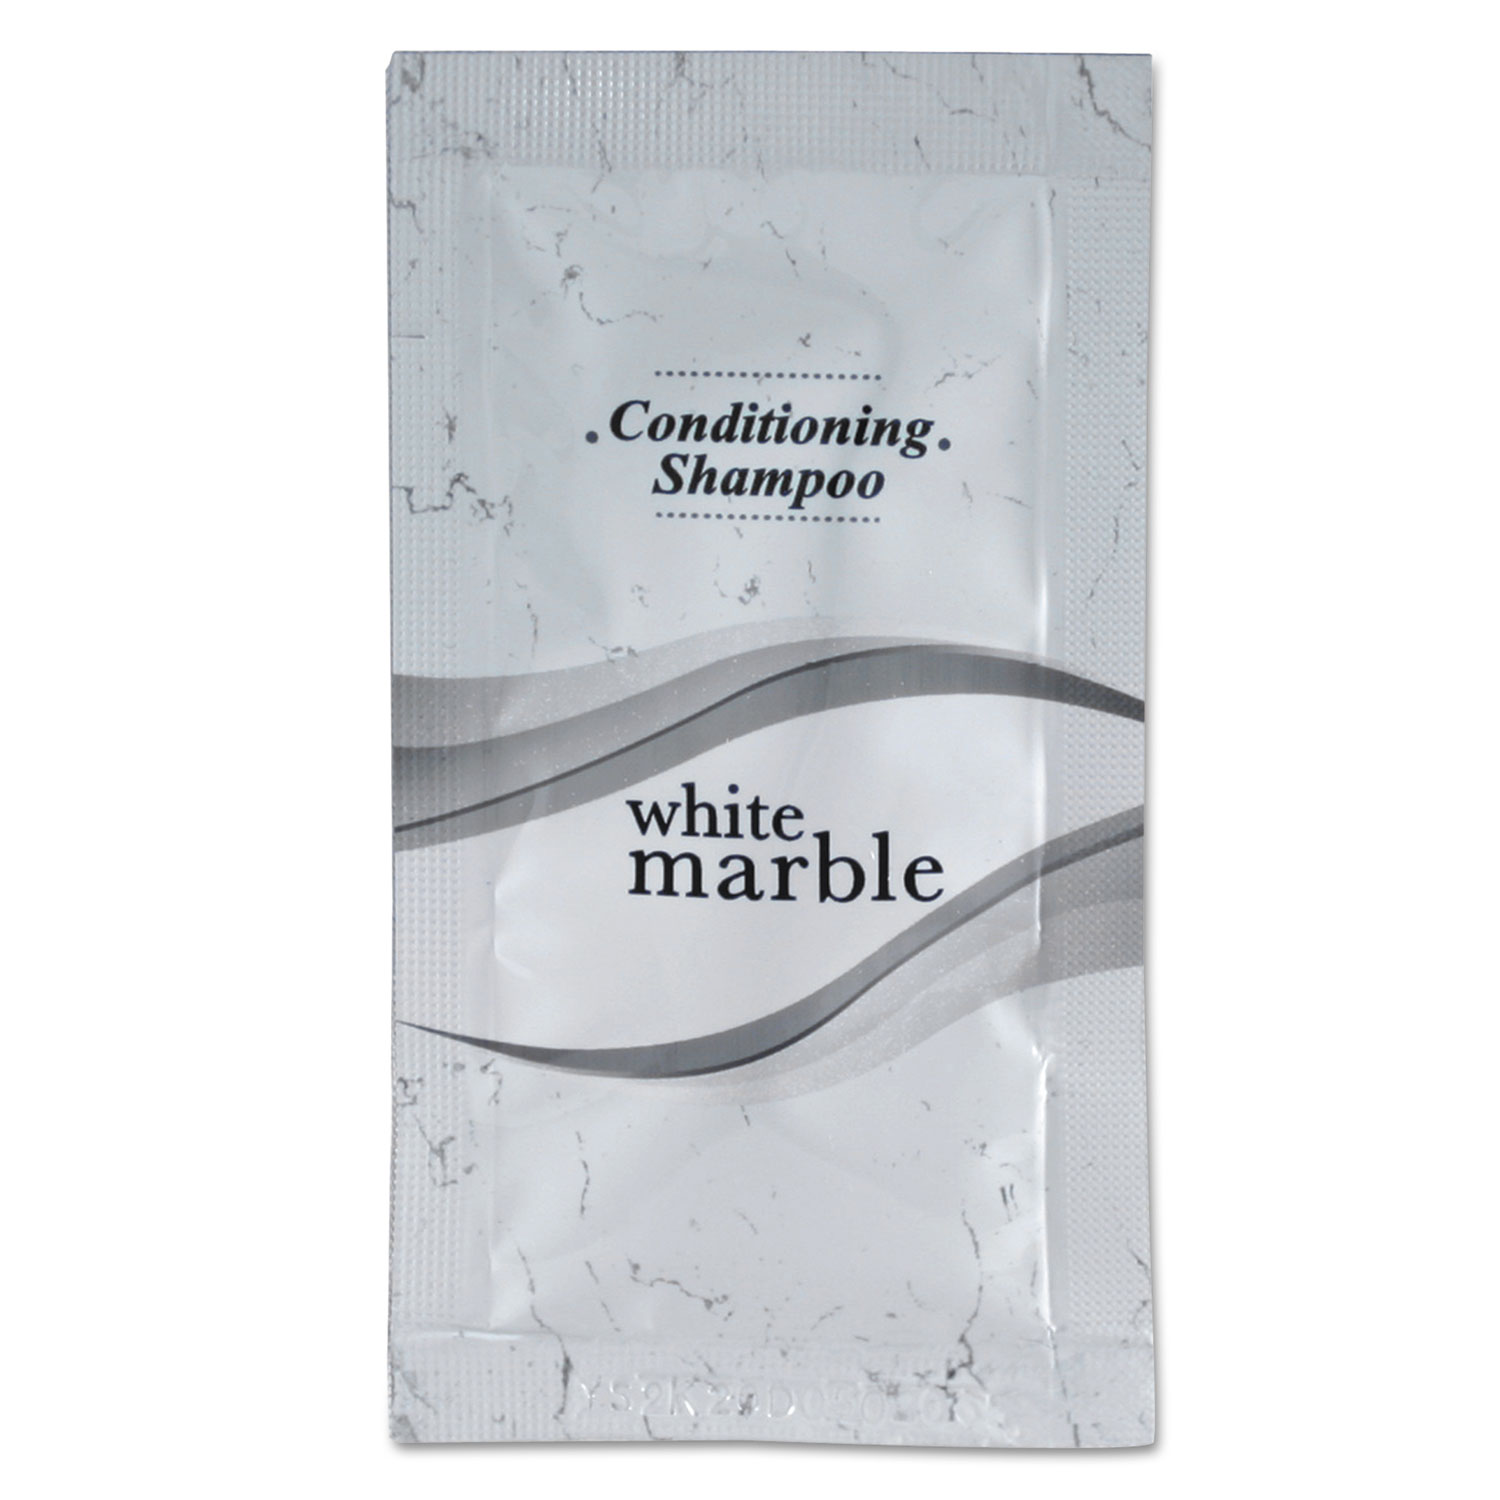 Shampoo/Conditioner, Clean Scent, 0.25 oz Packet